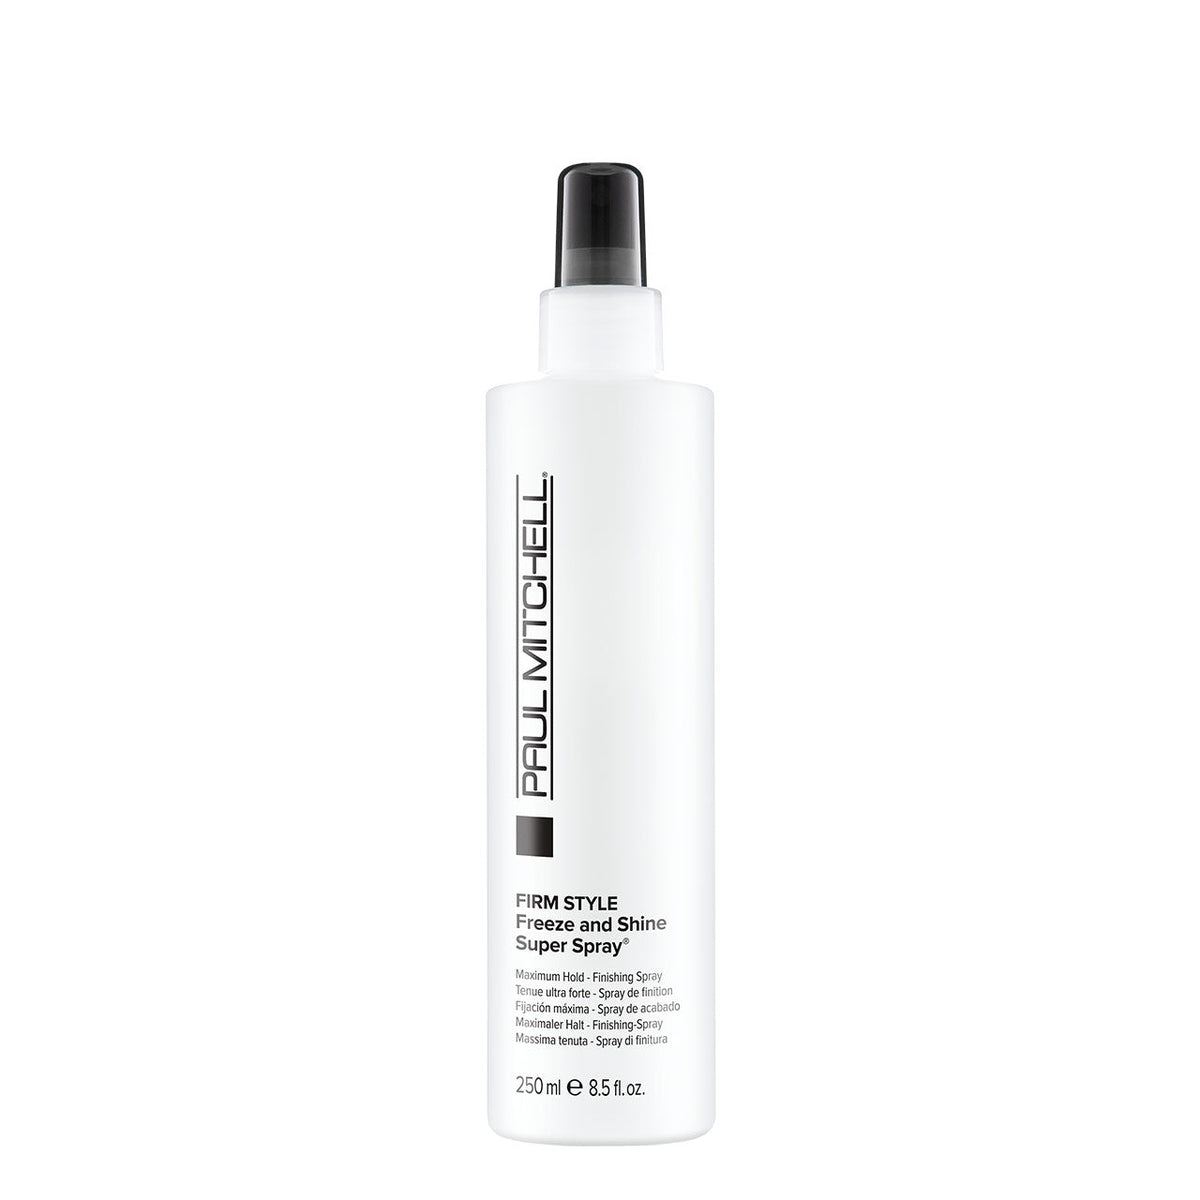 Firm Style Freeze and Shine Super Spray - 250ML - by Paul Mitchell |ProCare Outlet|